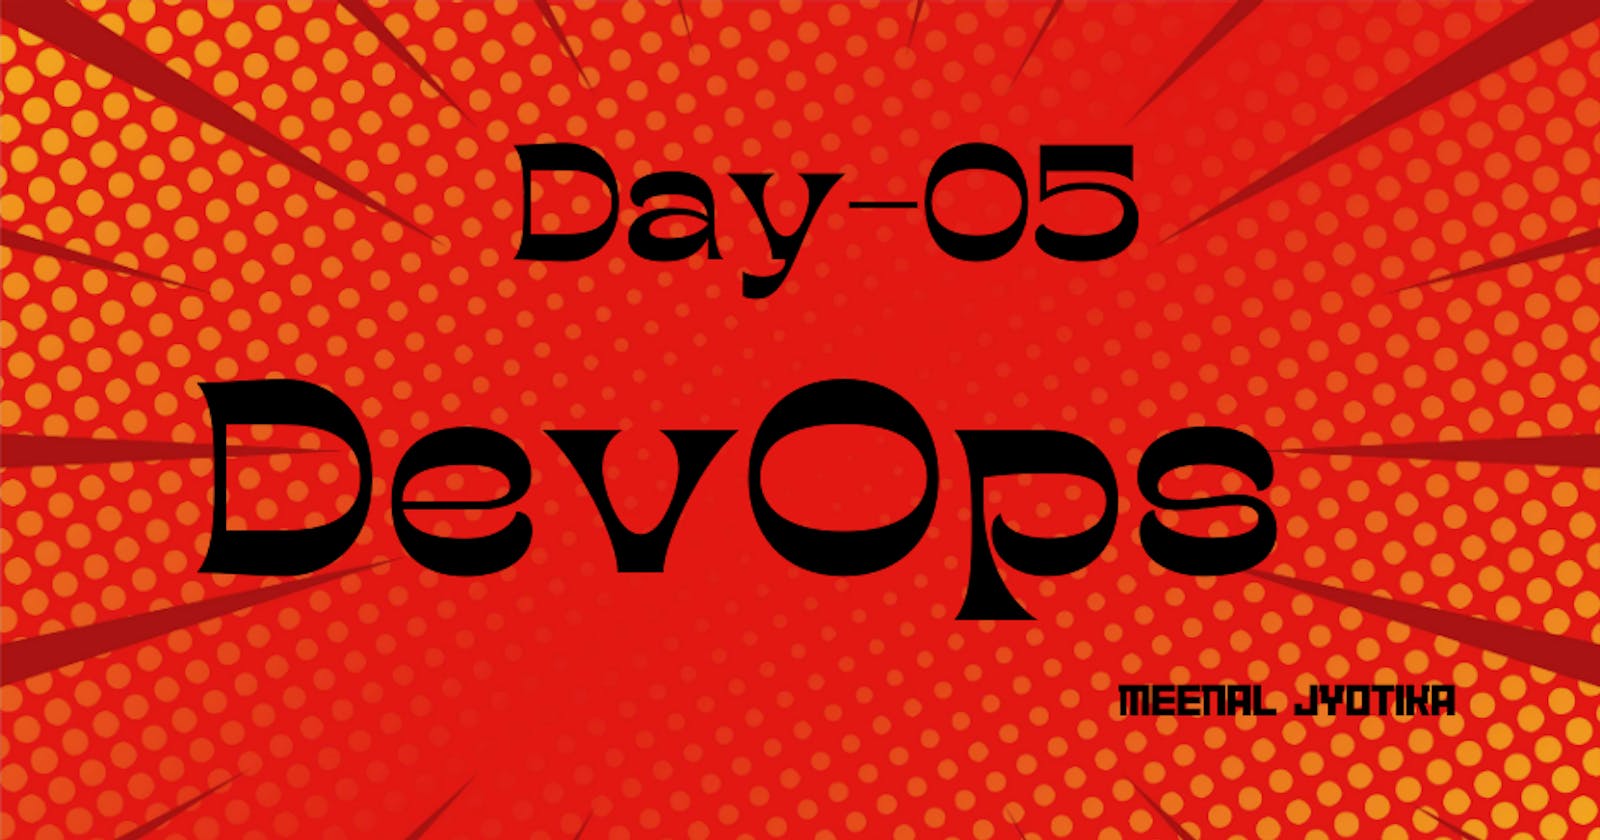 Day 05: Automating Directory Creation with Bash Scripting